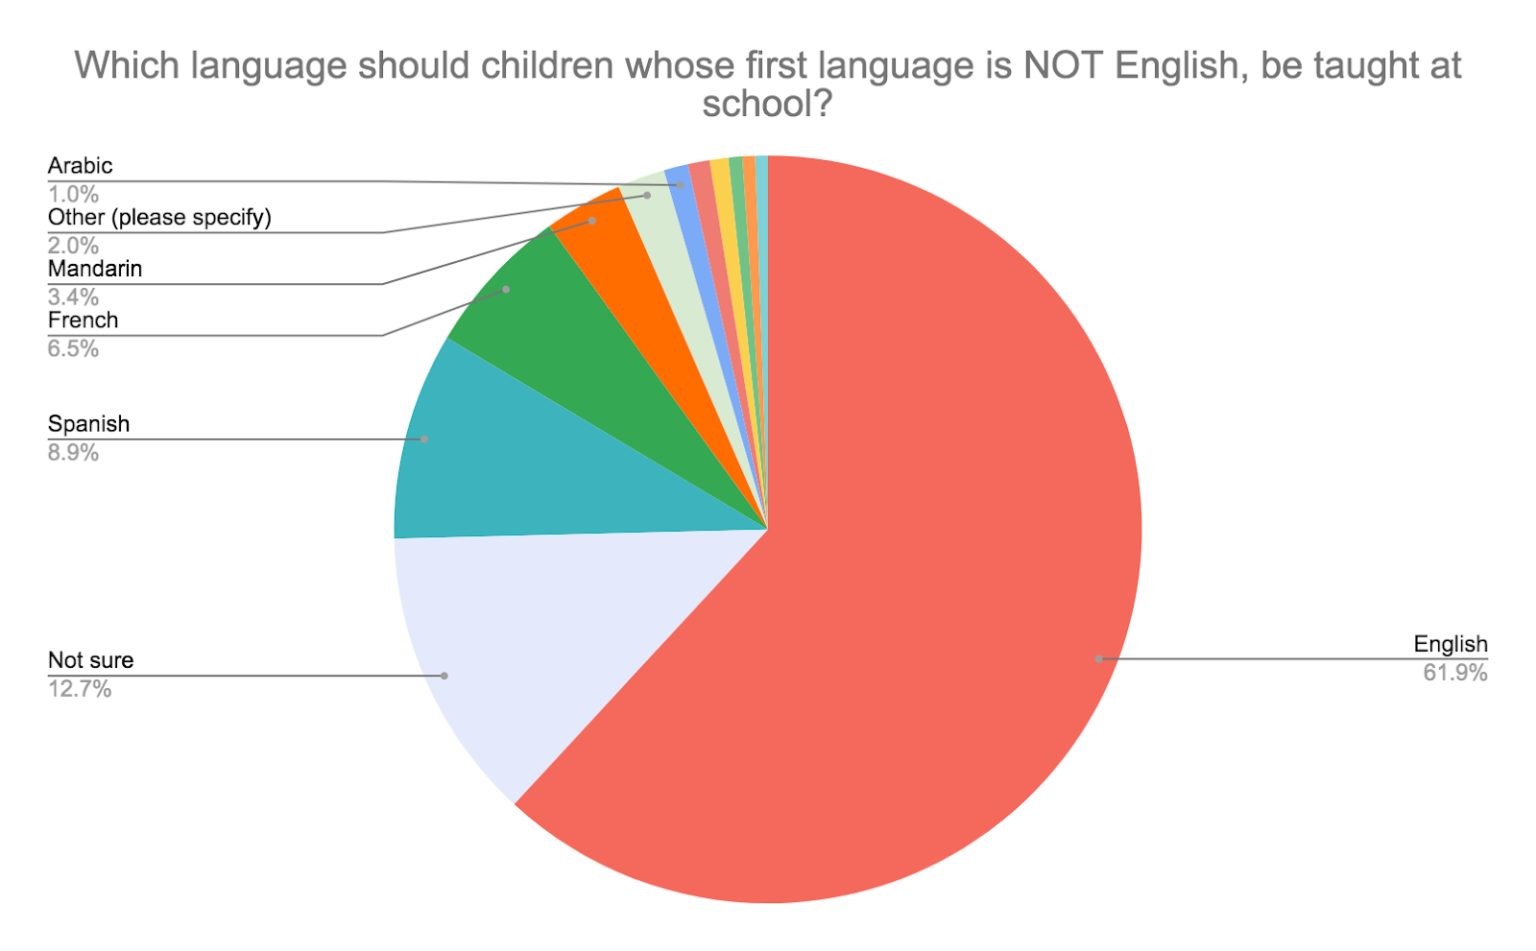 For children around the world whose first language is NOT English